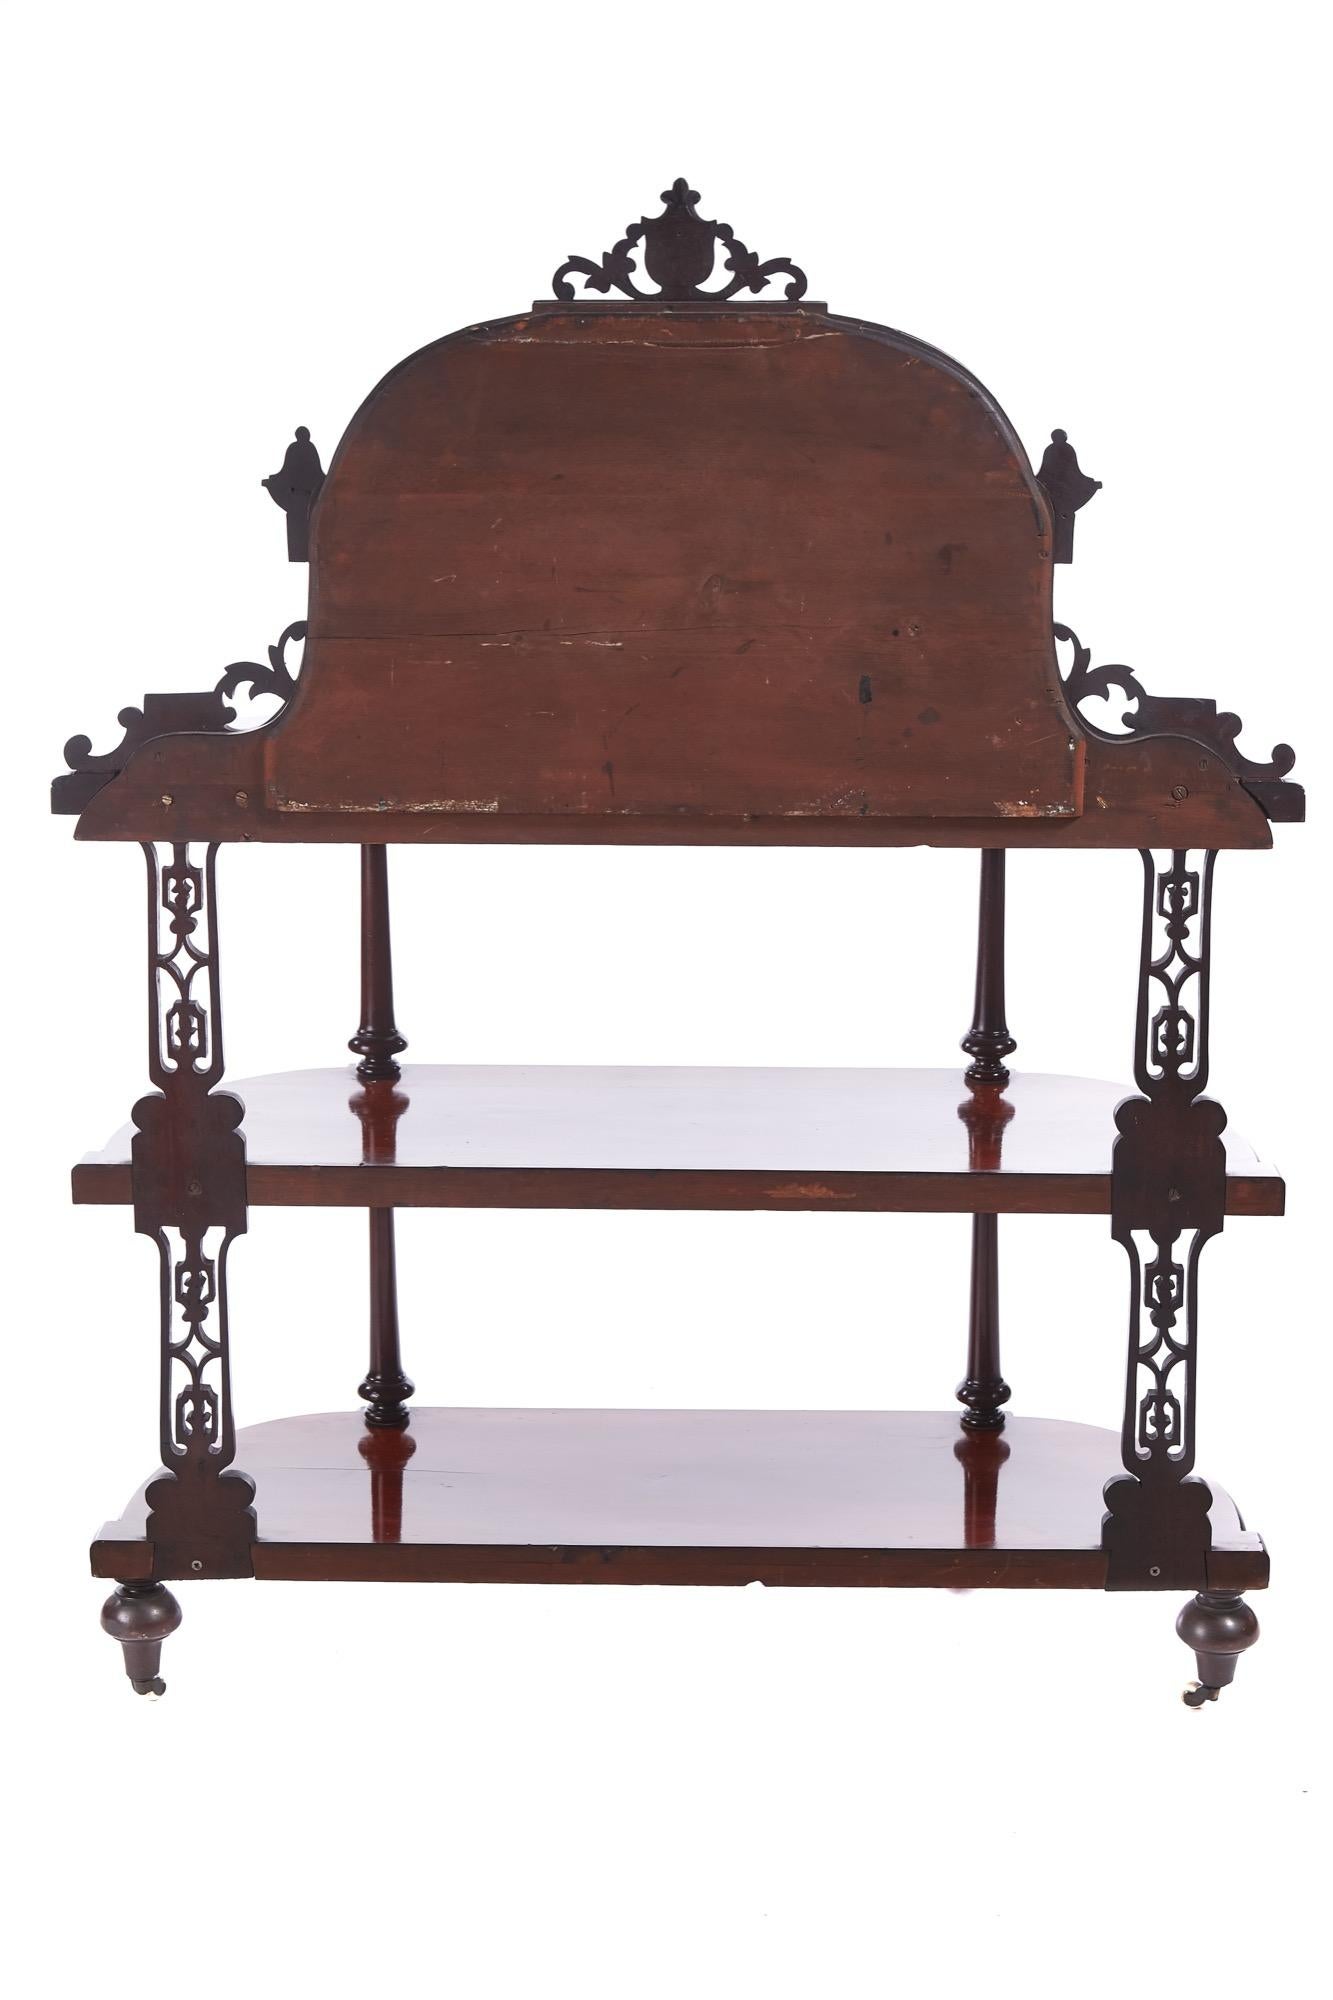 Quality antique Victorian mahogany carved mirror back whatnot having a lovely carved mahogany mirror back, quality mahogany top supported by 4 turned columns, 4 fret work supports, 2 mahogany shelves standing on turned mahogany feet with original